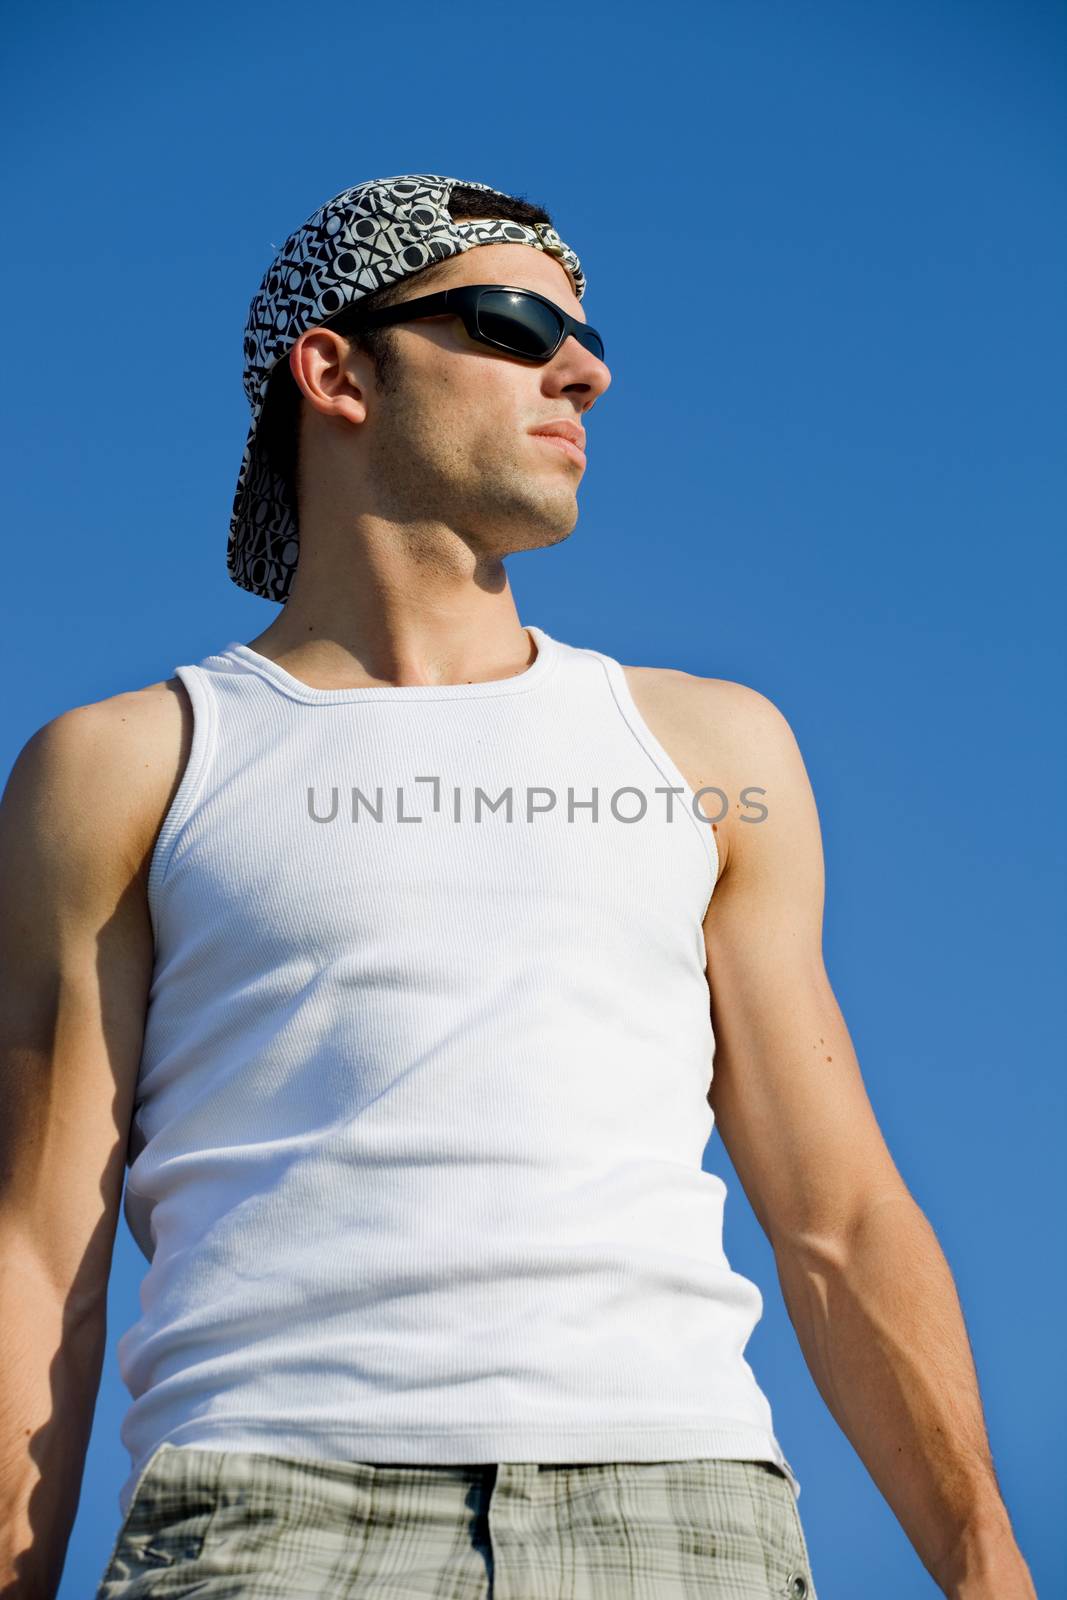 young casual man looking with the sky as background